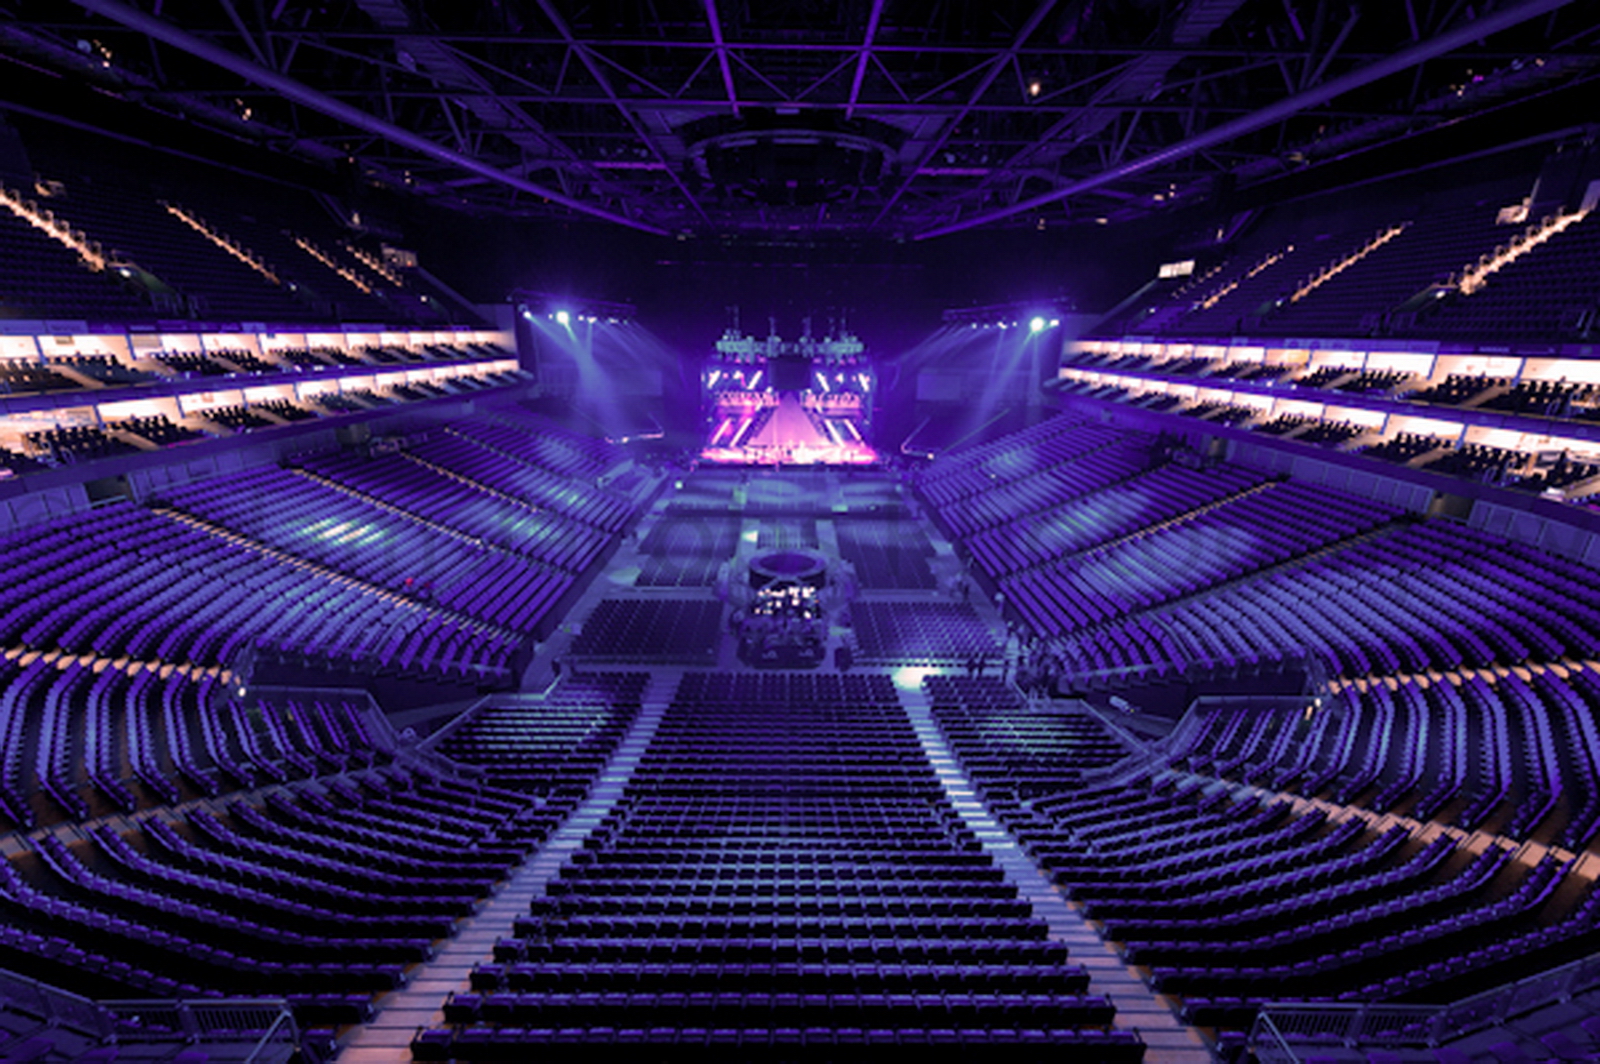 24-the-o2-arena-london-seating-plan-empty-seats-high-resolution.jpg